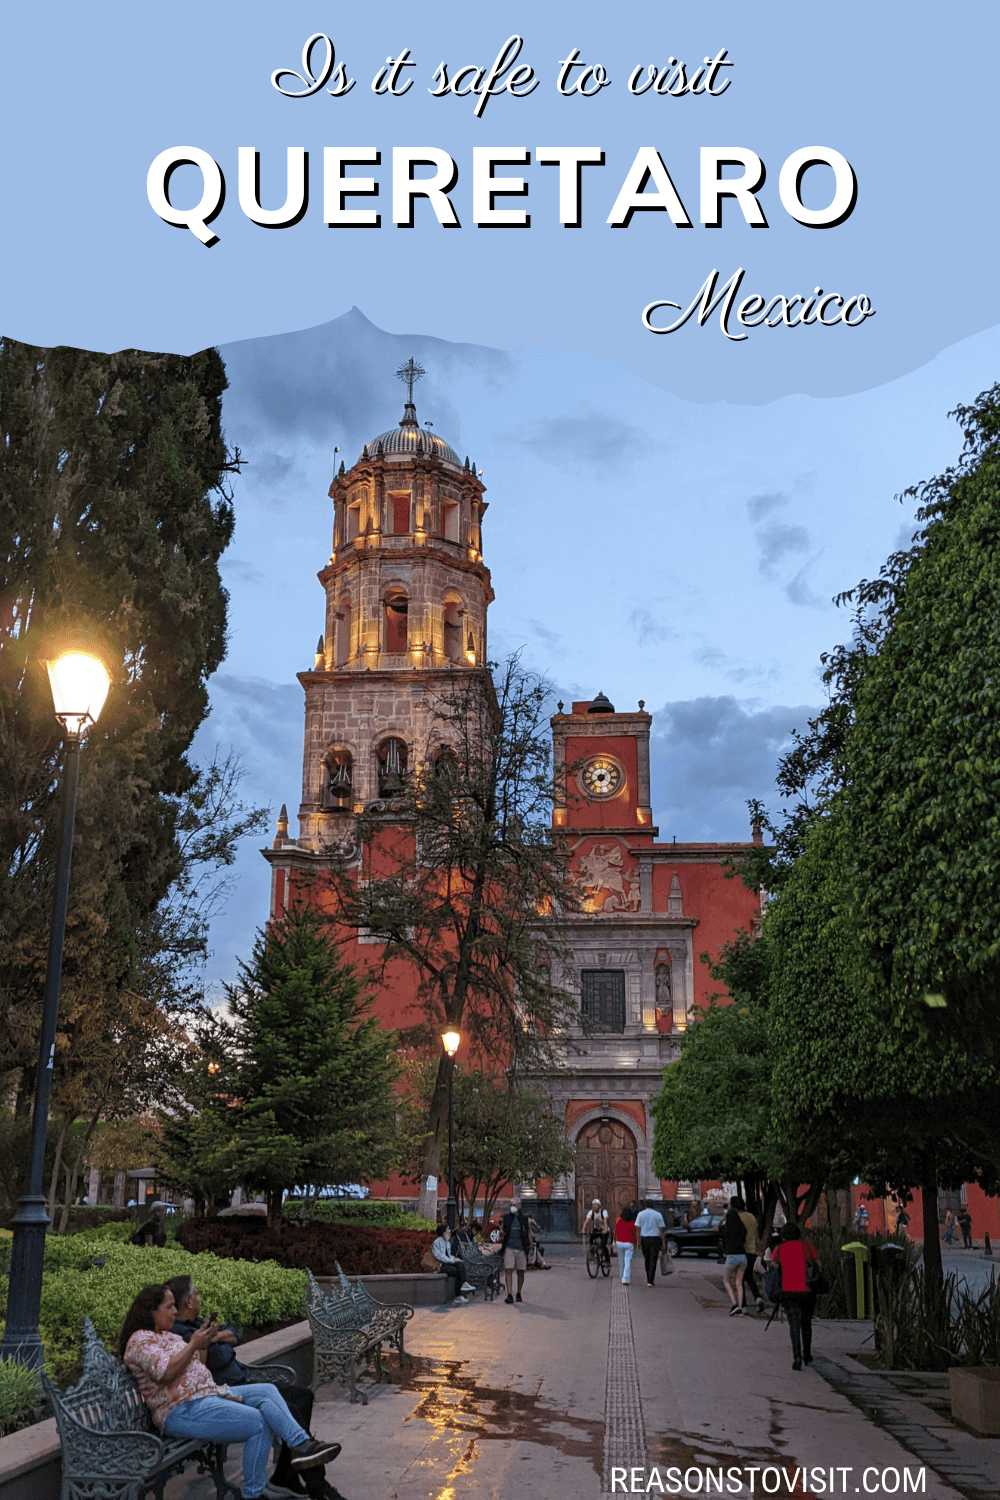 Wondering about safety in Querétaro, Mexico? This guide covers all you need to know about staying safe while enjoying the vibrant culture and historic sites of Querétaro. Perfect for first-time visitors and seasoned travellers alike.